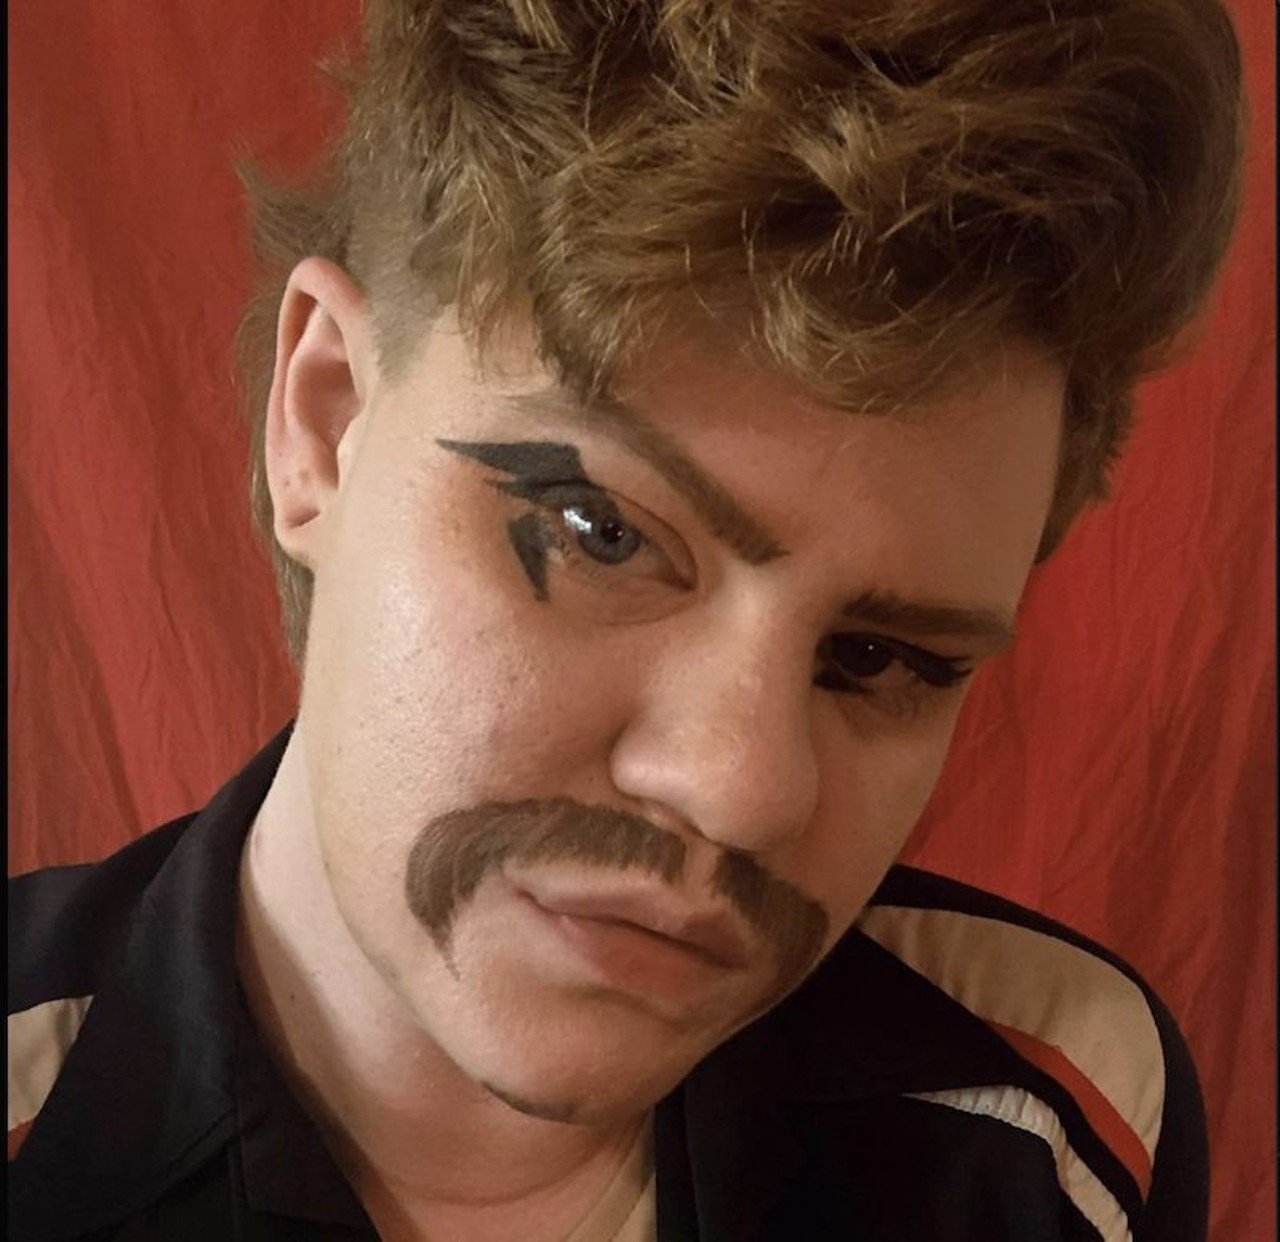 Teddy Bow
Nashville, TN  
Teddy Bow is a Nashville-based drag king and multimedia artist that has visited and performed in Louisville. Photo via  Teddy Bow